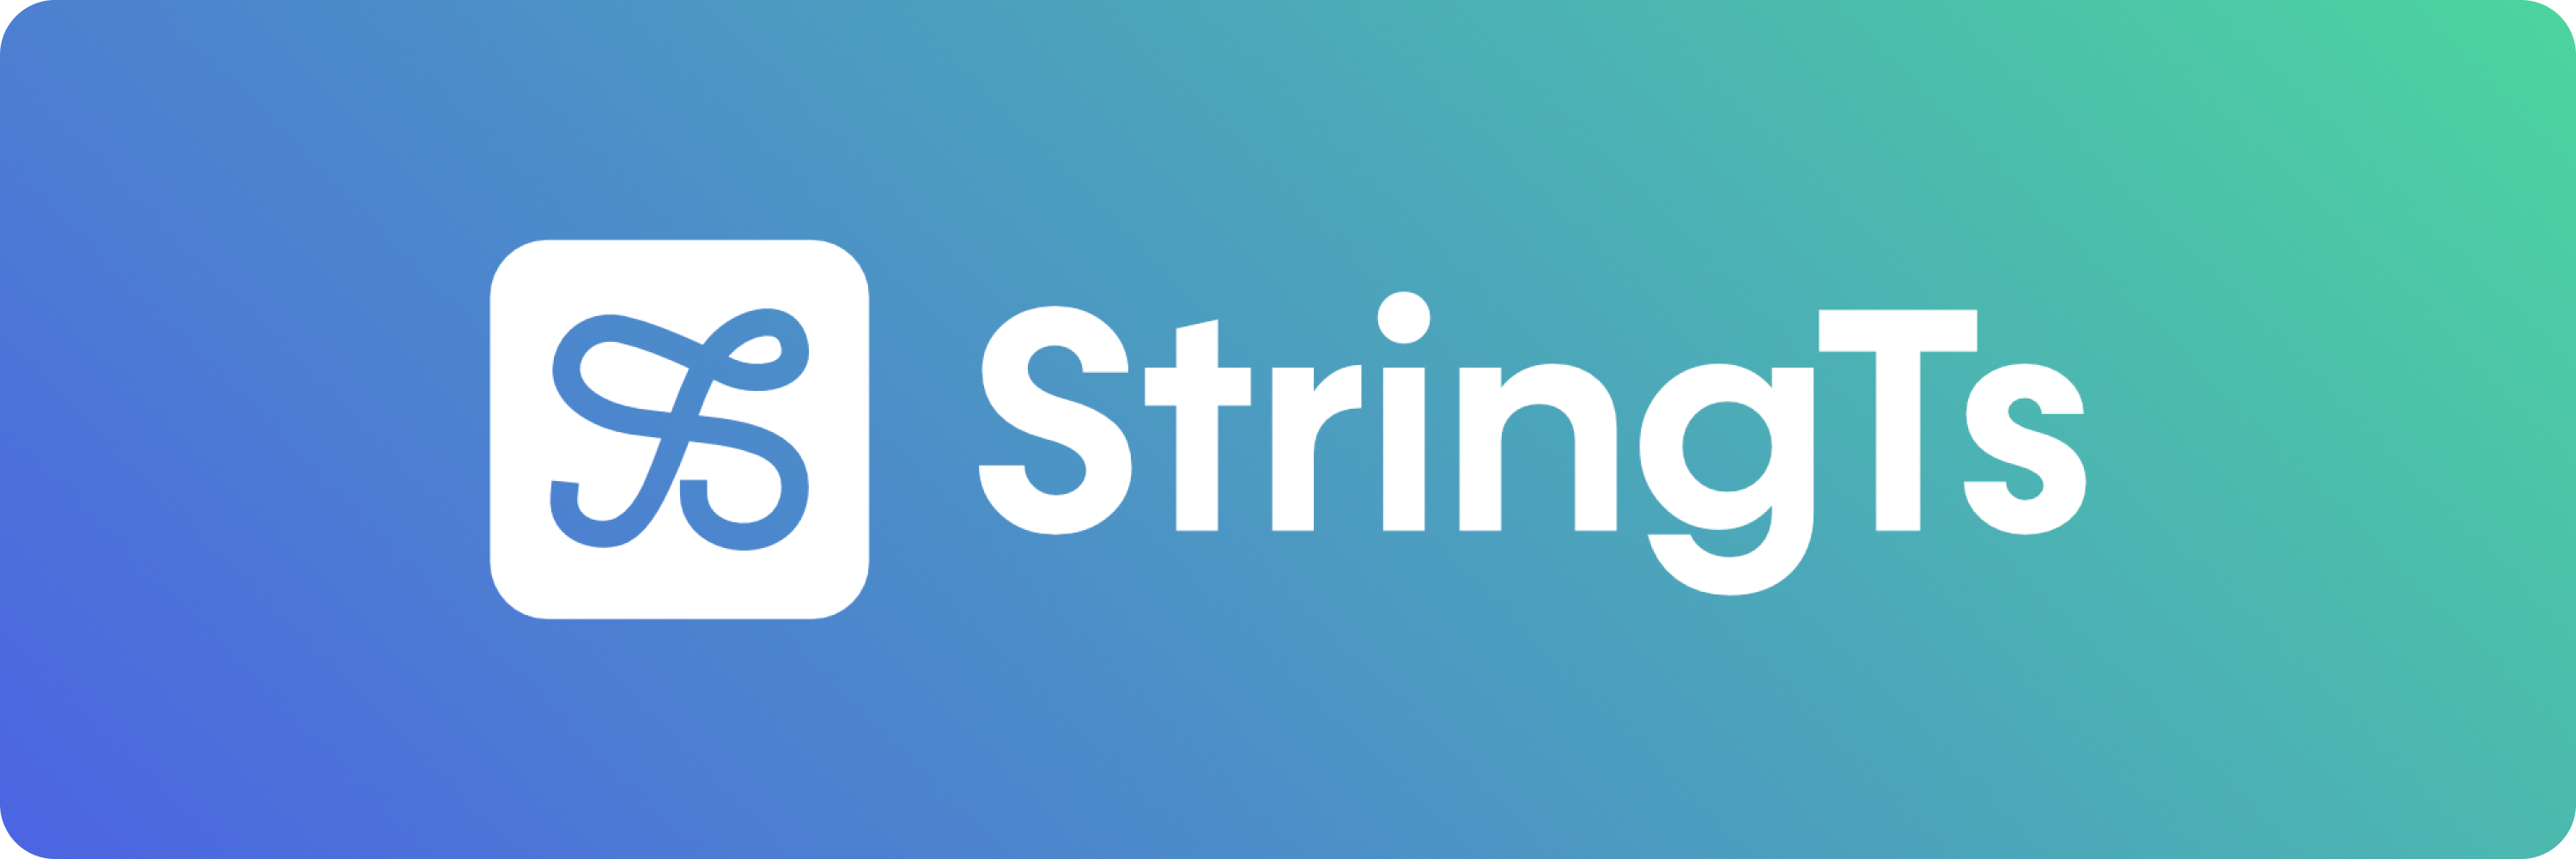 string-ts-banner.png